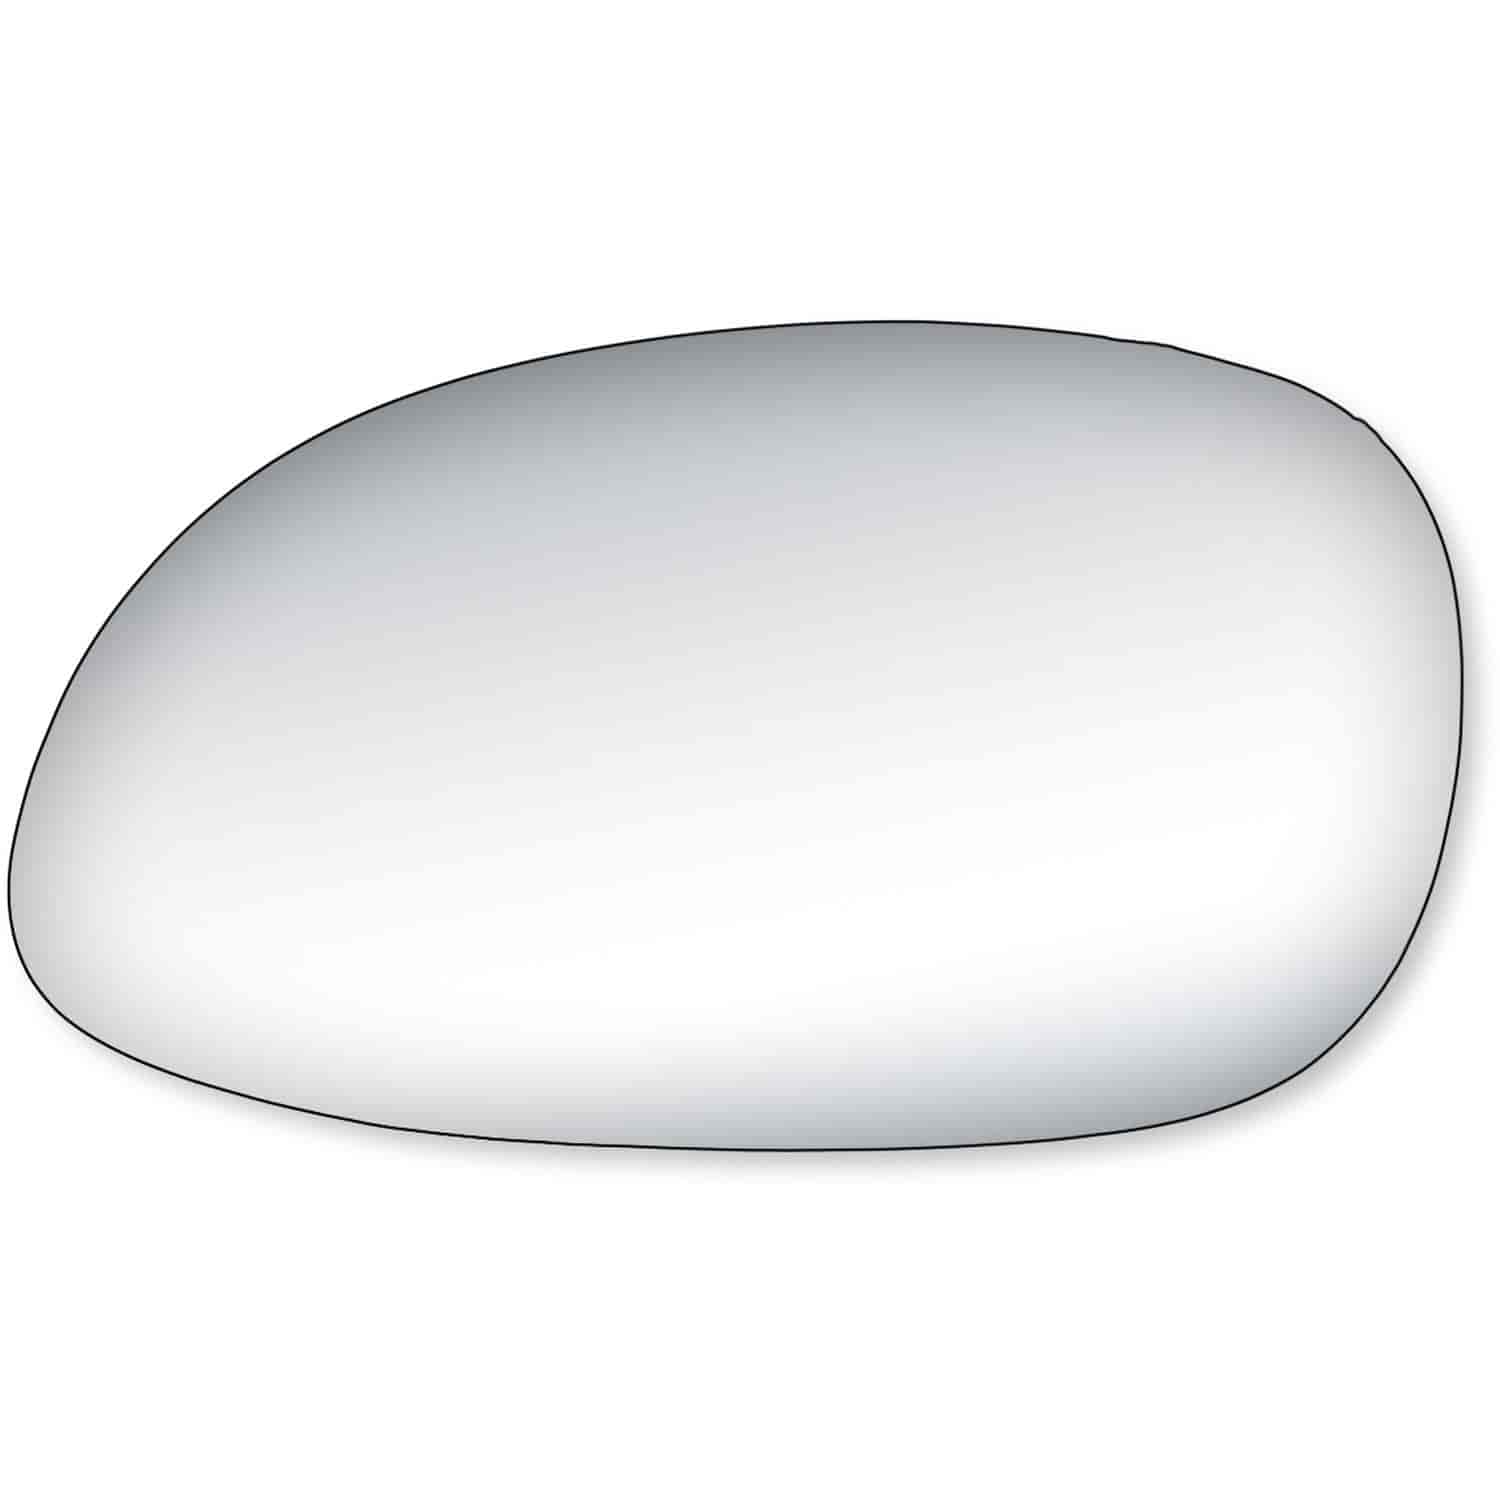 Replacement Glass for 92-95 Civic Coupe/ Hatchback/ Sedan